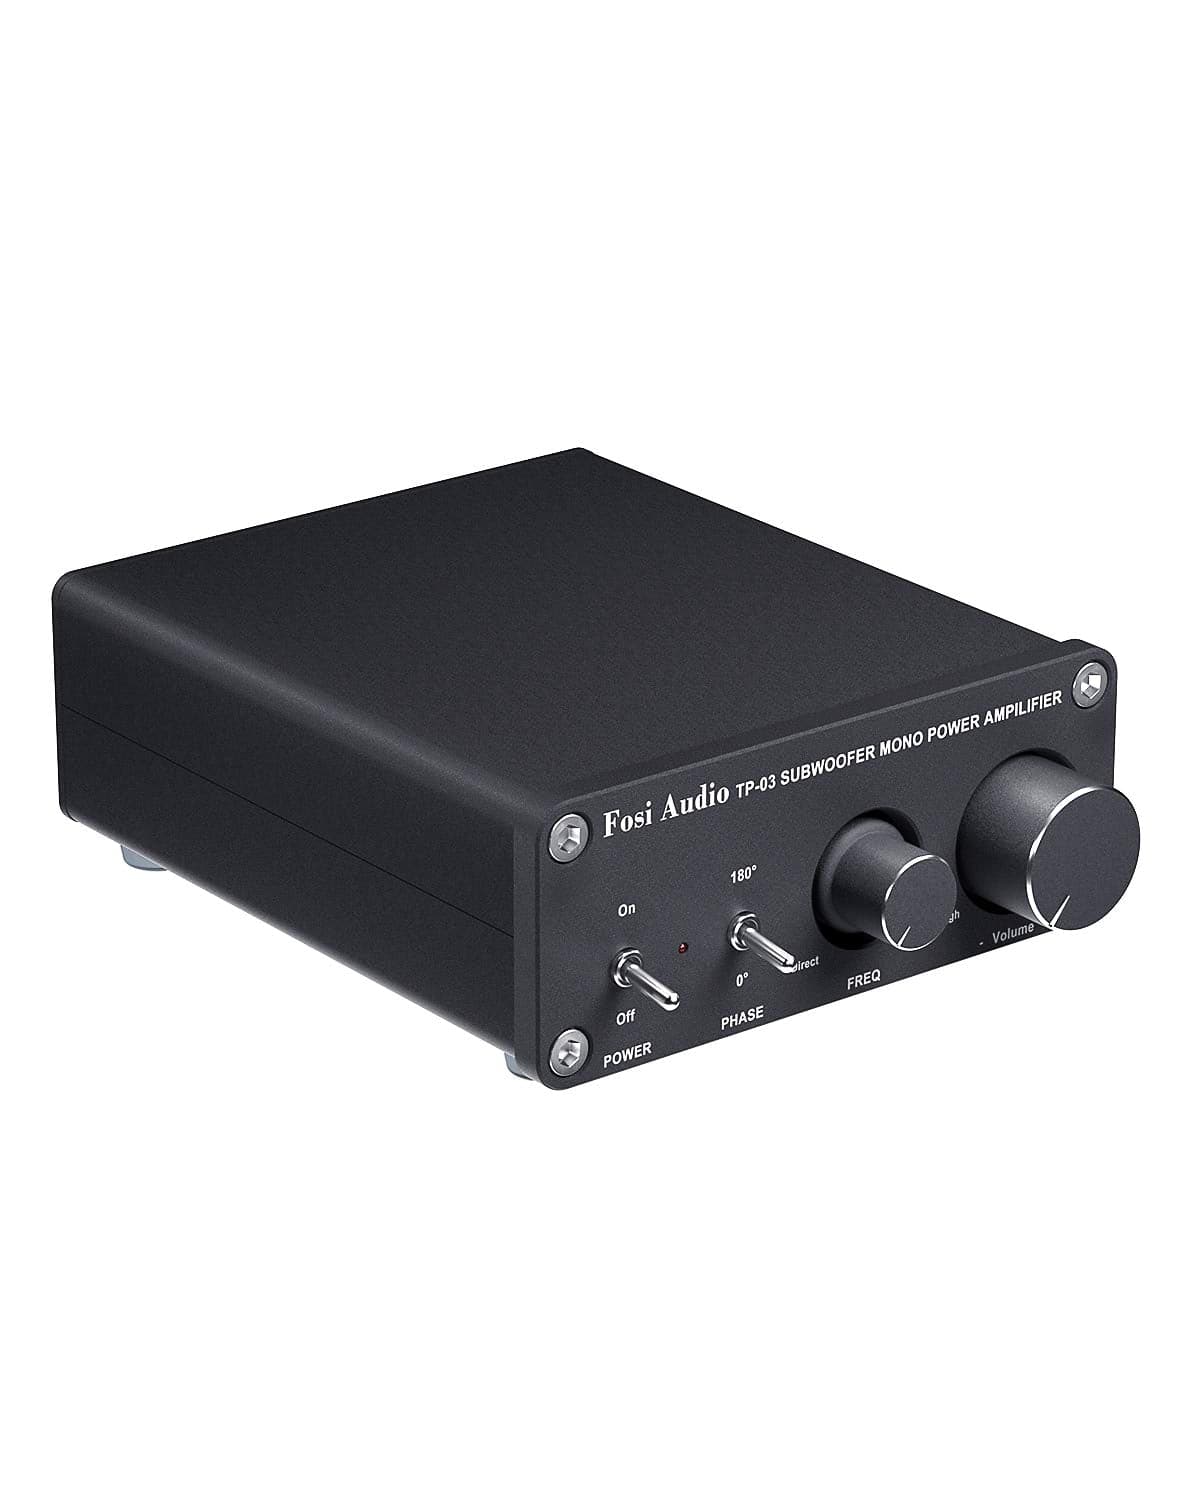 Fosi Audio TP-03 Subwoofer Amplifier & Mono Amp Full-Frequency and Sub Bass Switchable Amplifier 220Watt